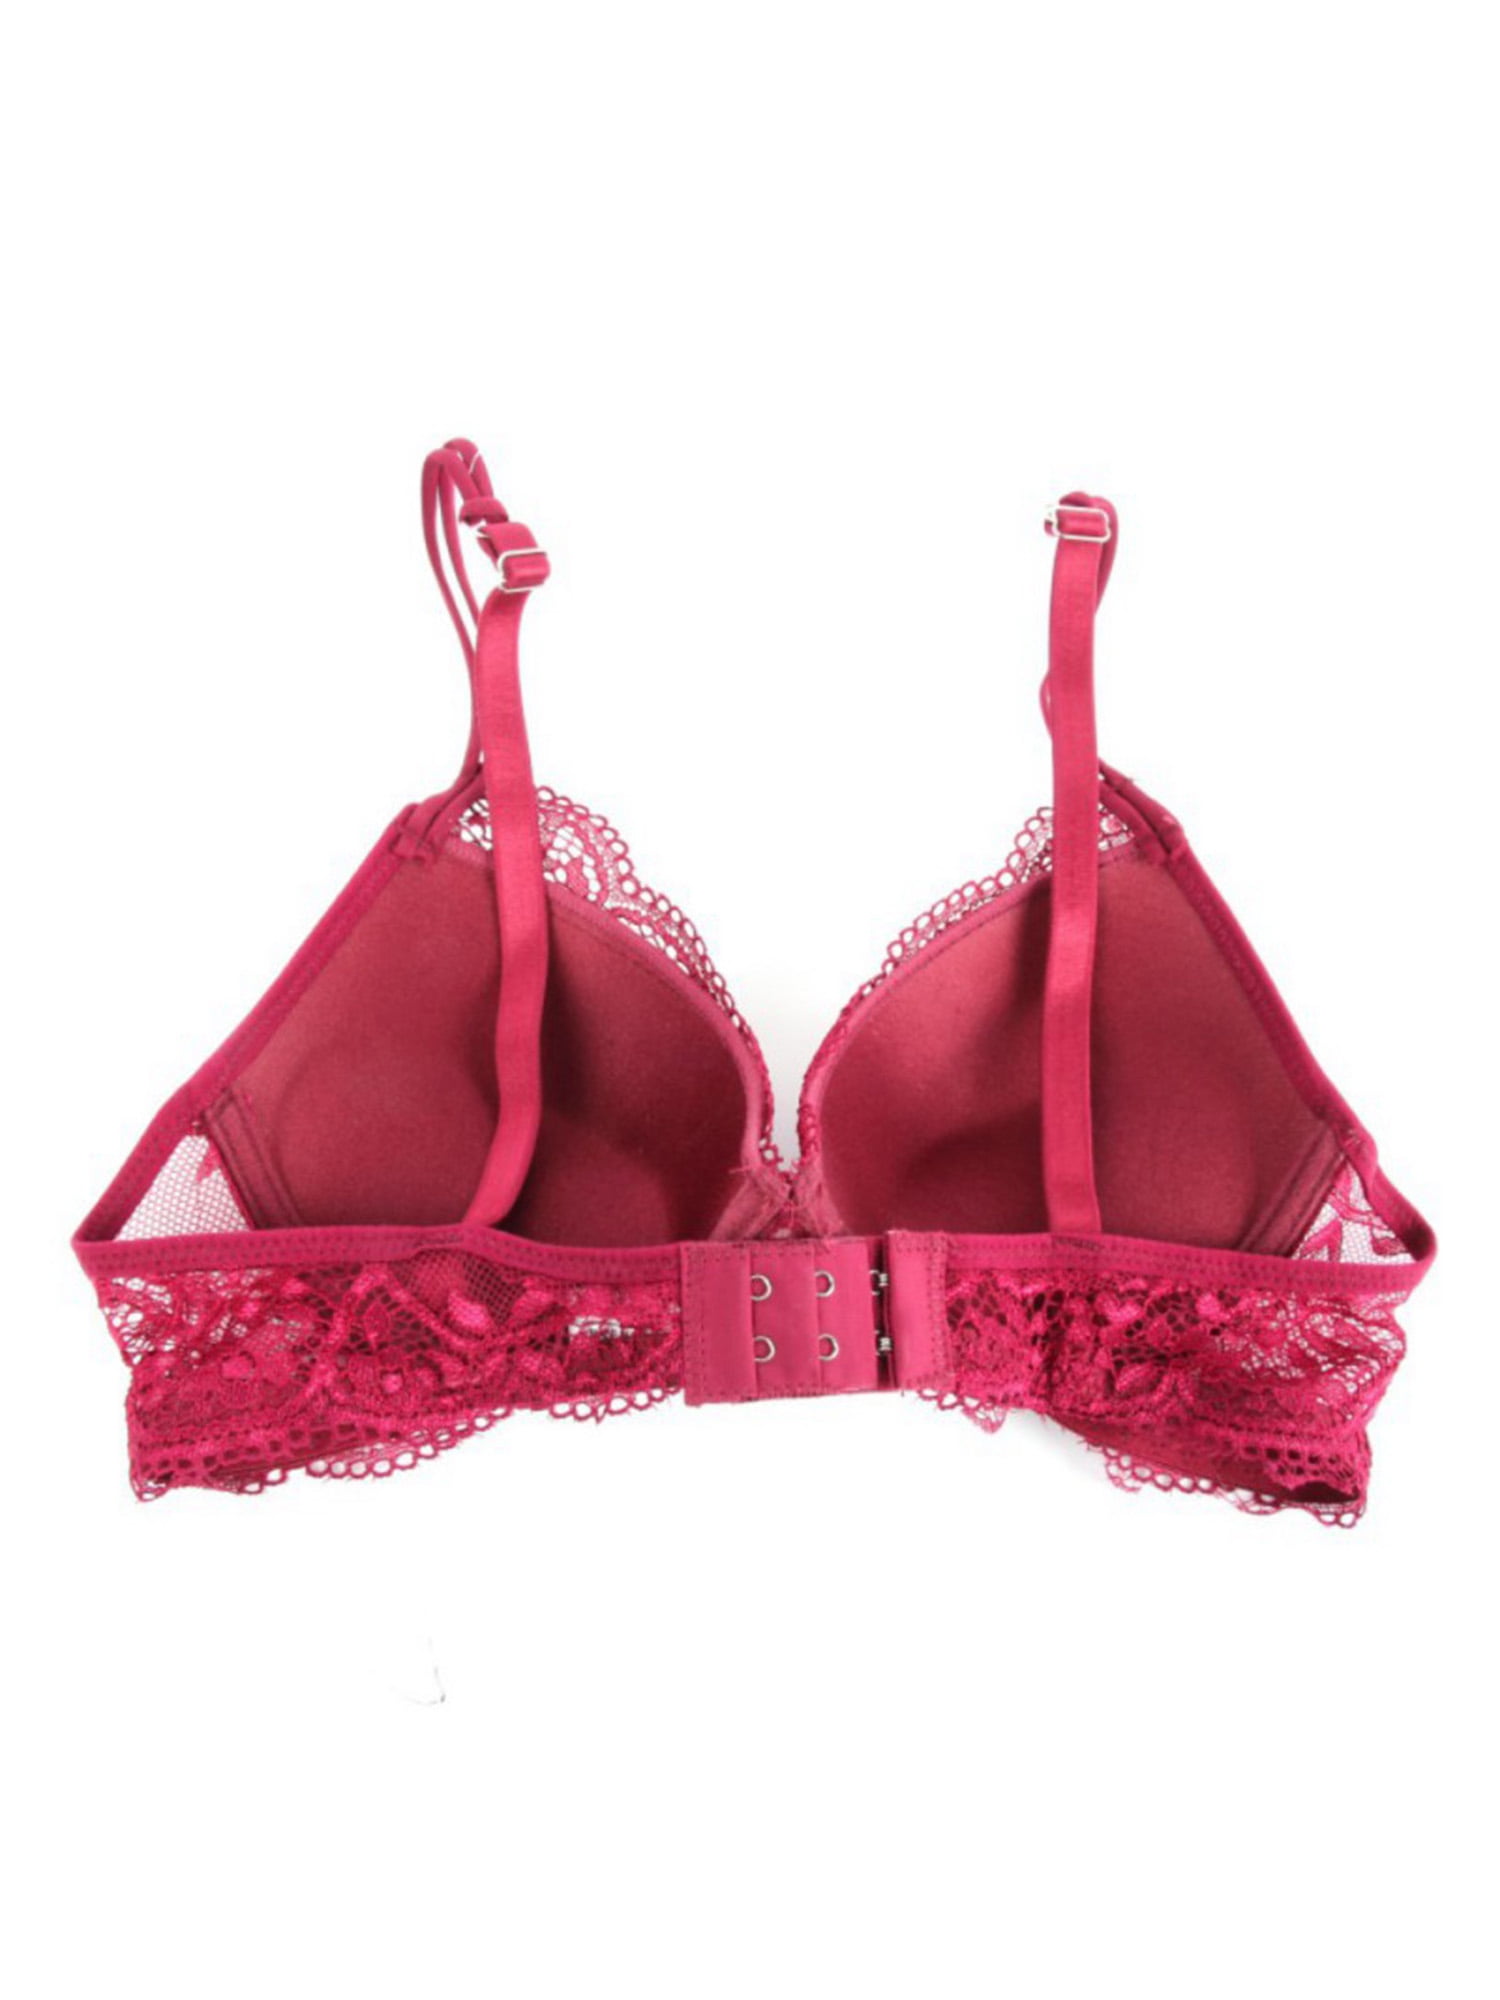 Buy Bodycave Baby Pink Woman Bra Panty Set with net Size 34 B Cup